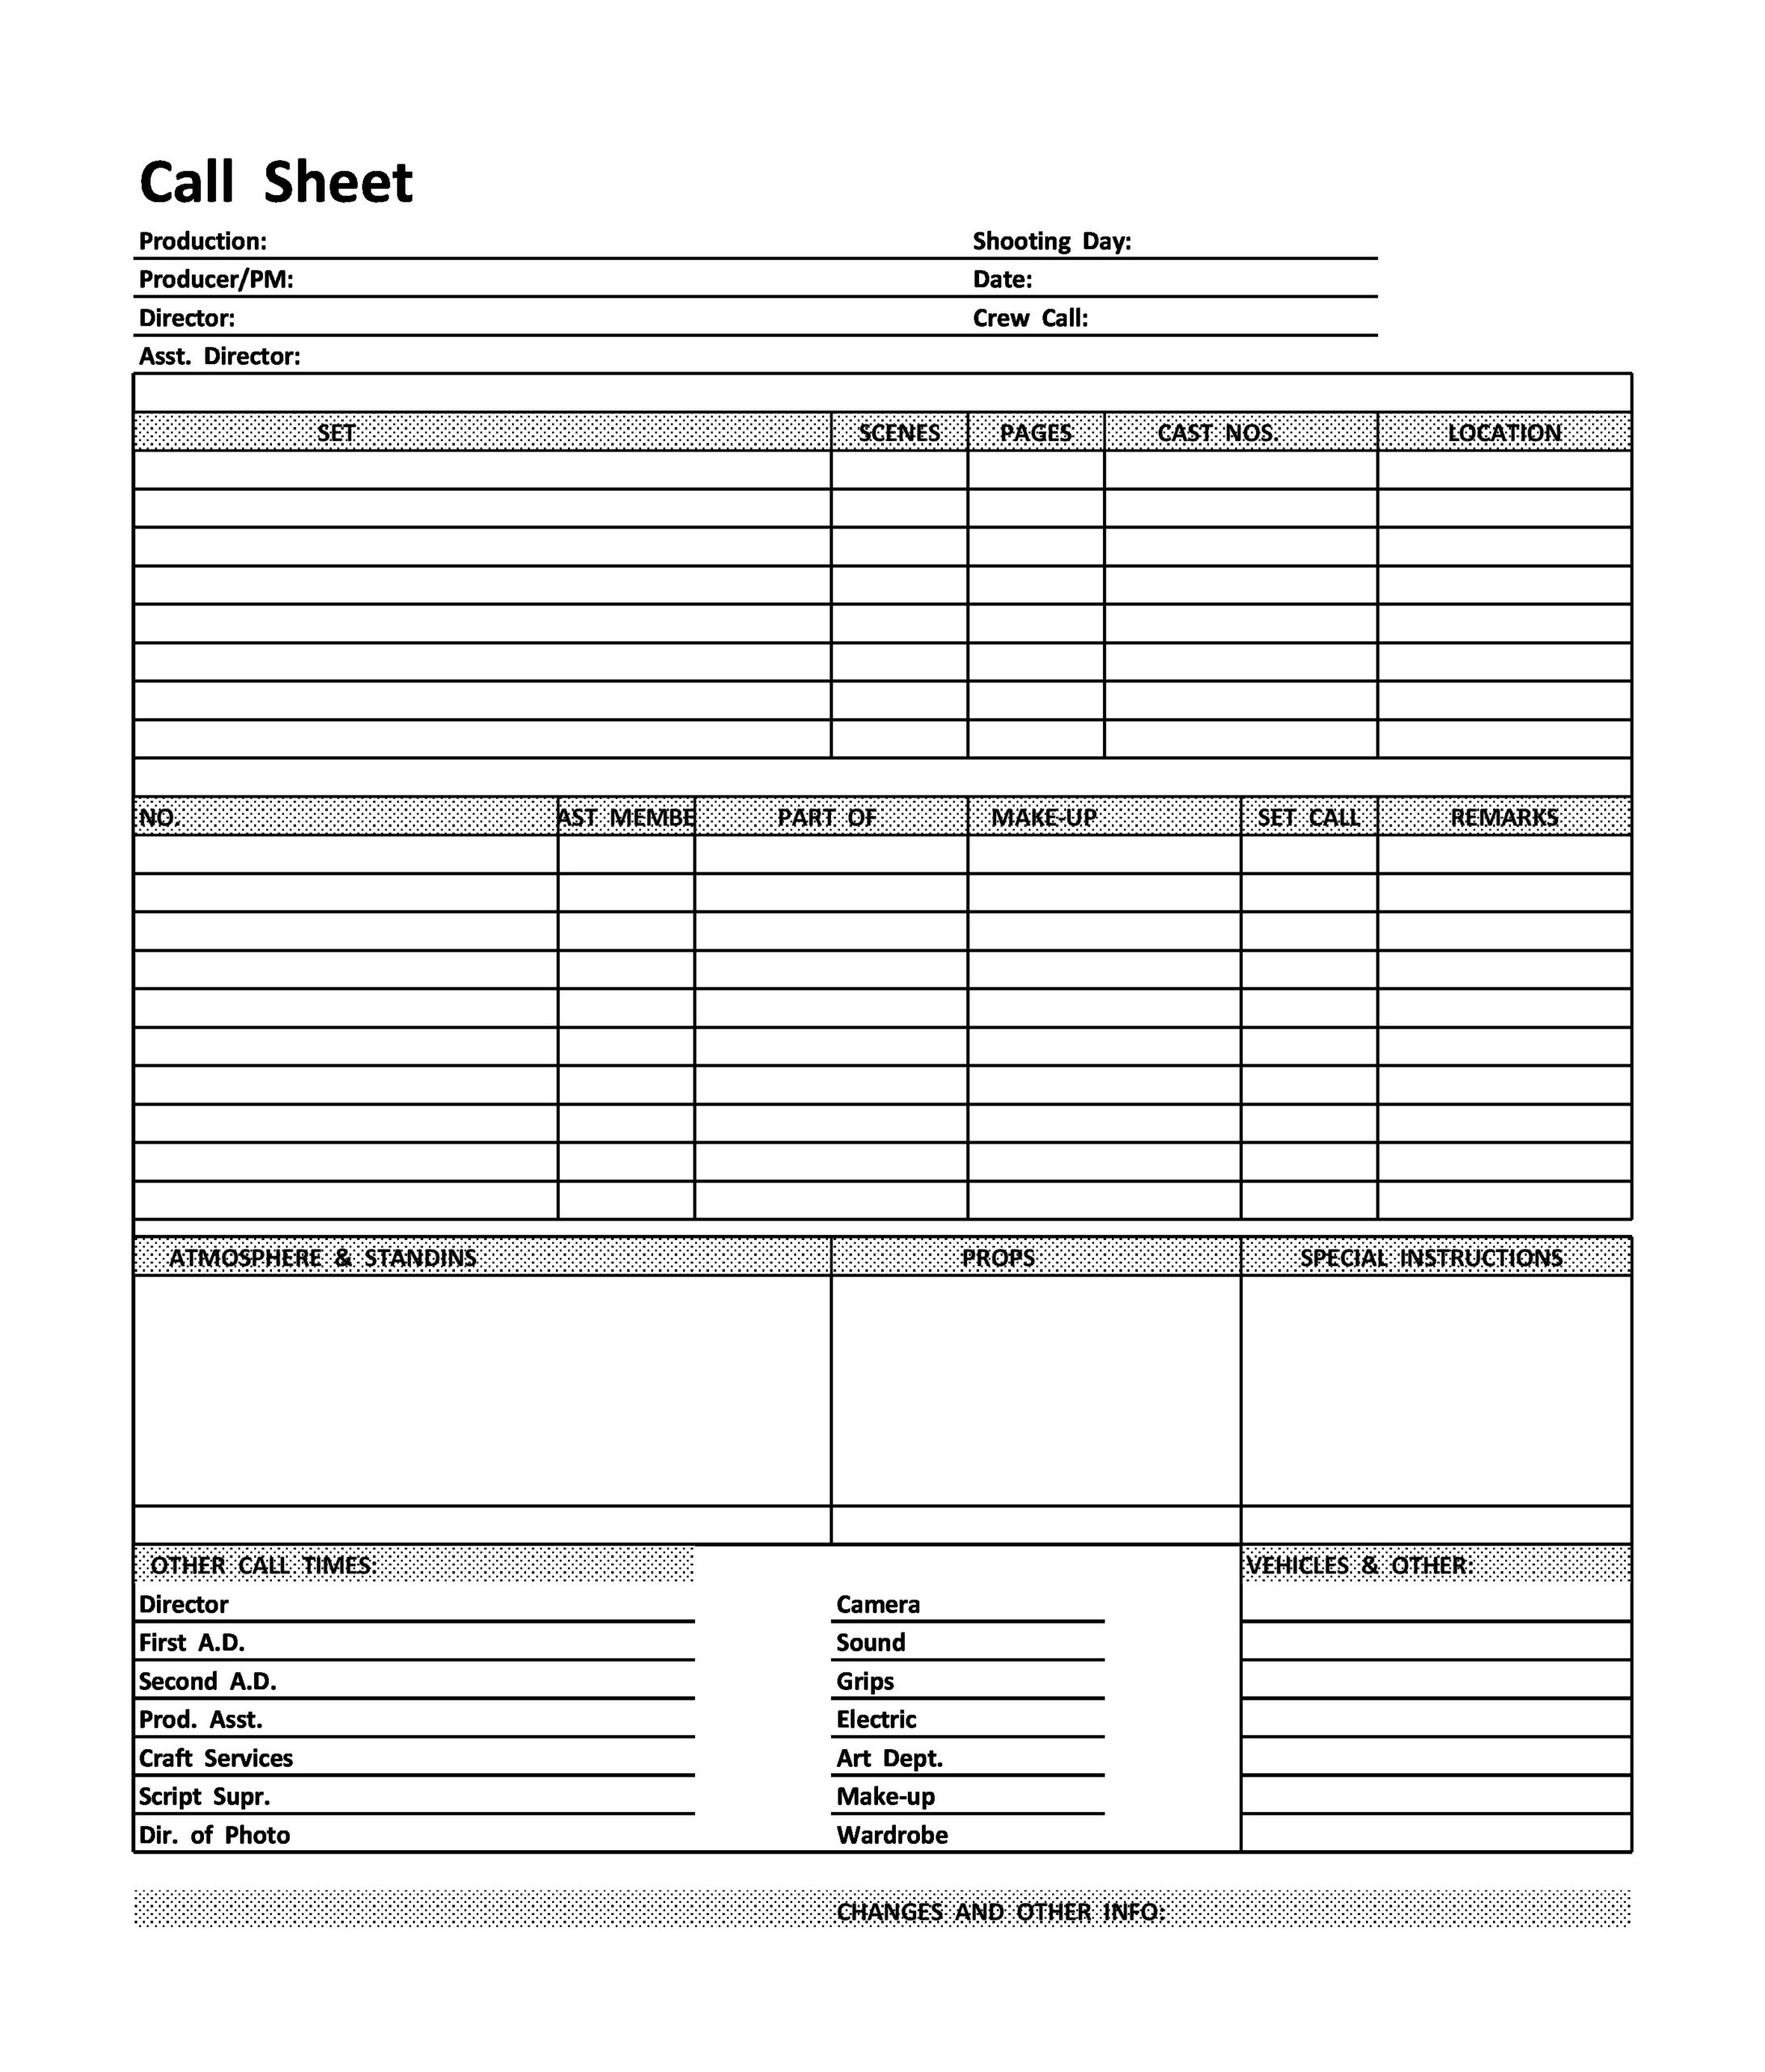 20 Simple Call Sheet Templates (FREE) - TemplateArchive Pertaining To Film Call Sheet Template Word